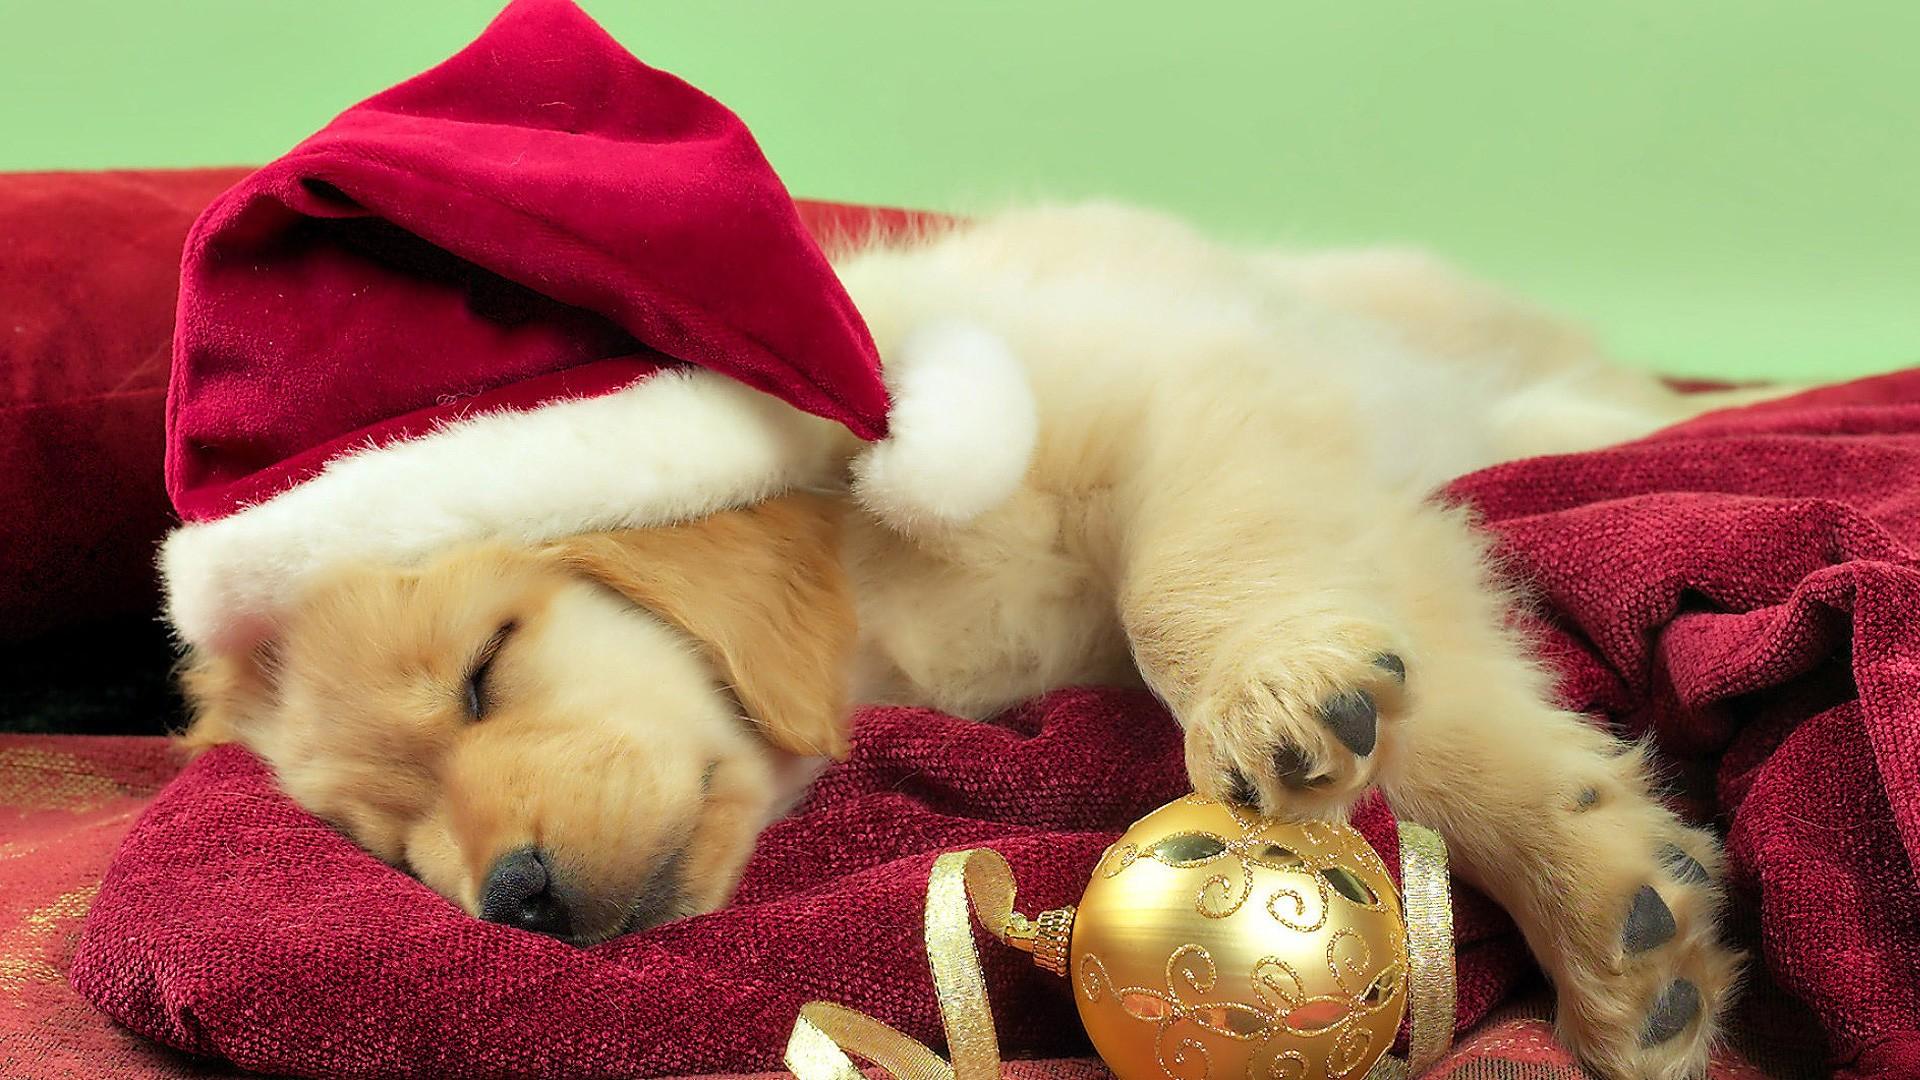 Cute Santa Windows 8.1 Theme and Wallpapers All for Windows 10 Free